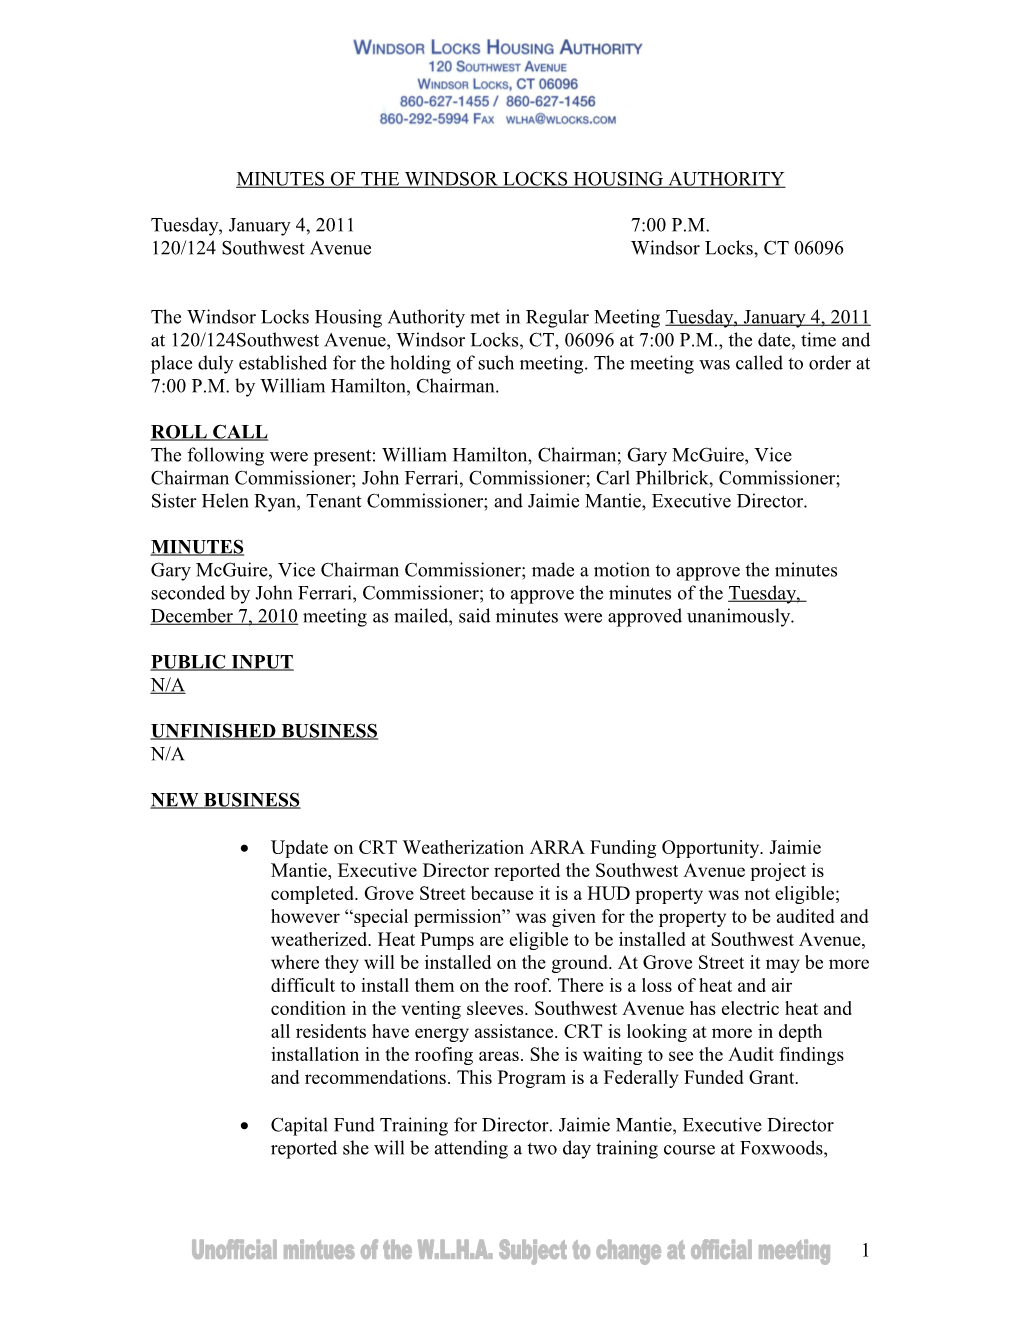 Minutes of the Windsor Locks Housing Authority s3